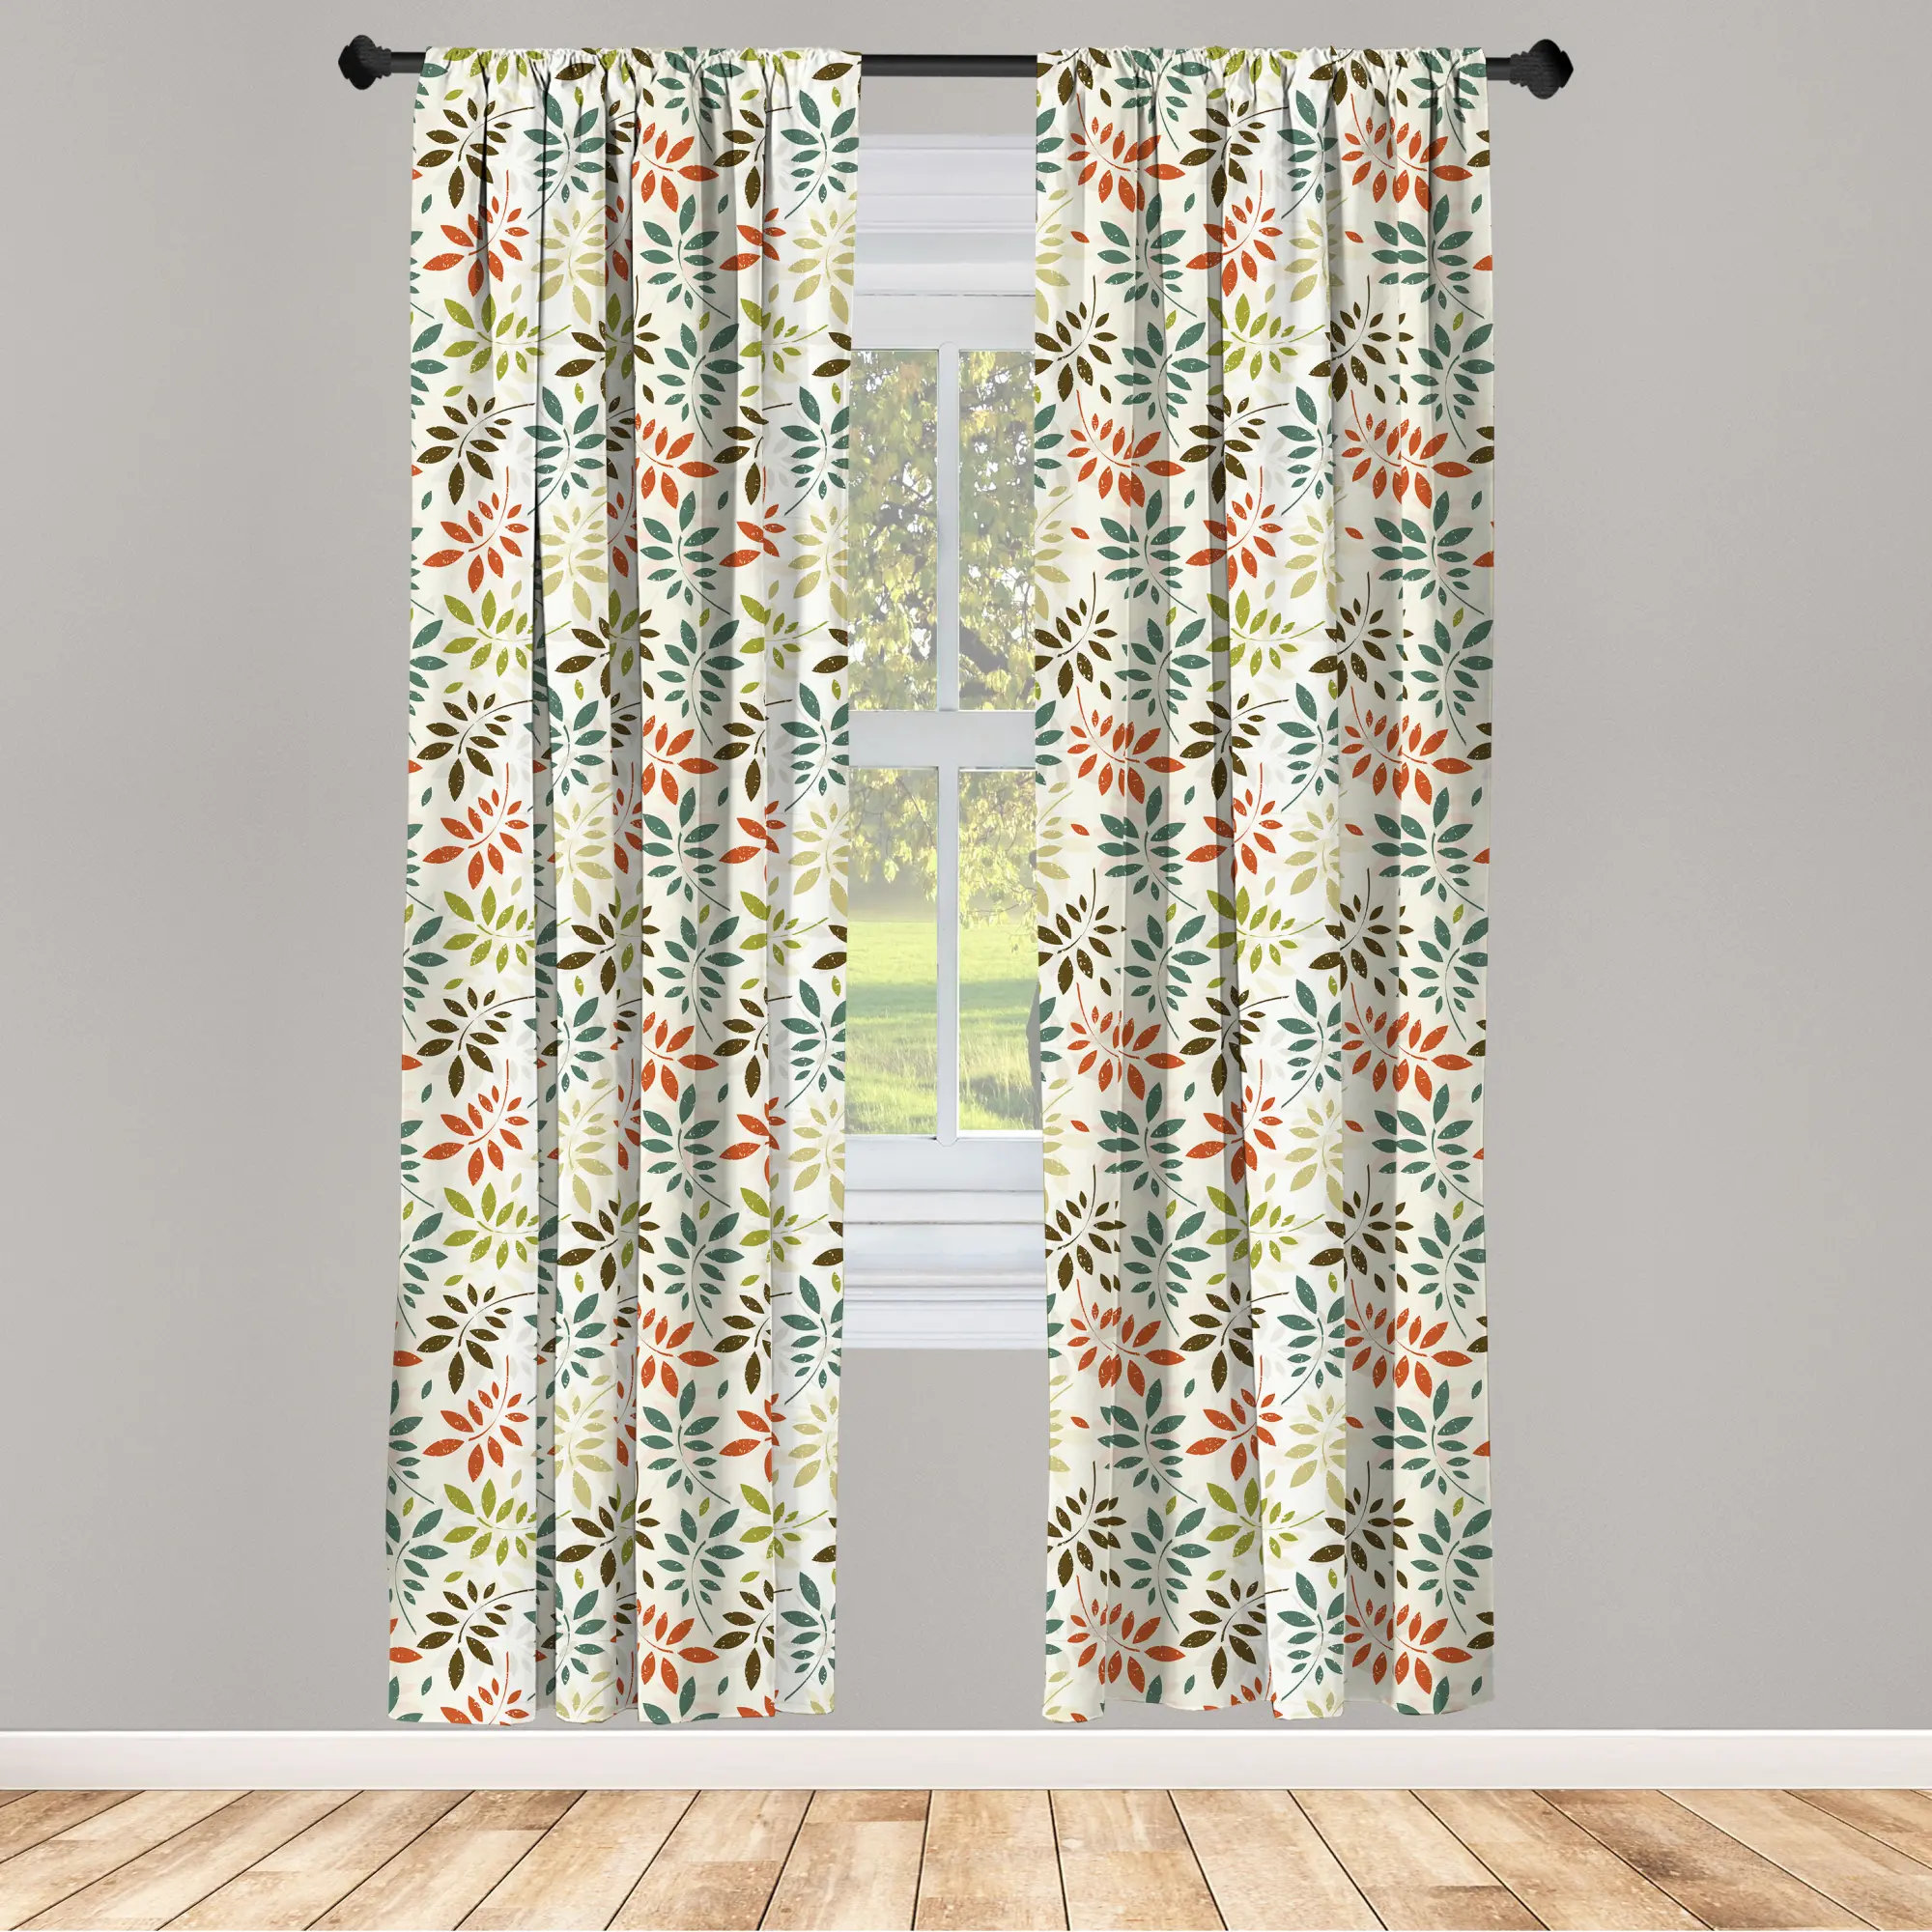 Ambesonne Room Decor with Rod Pocket Curtains 2 Panel Set Window Drapes 